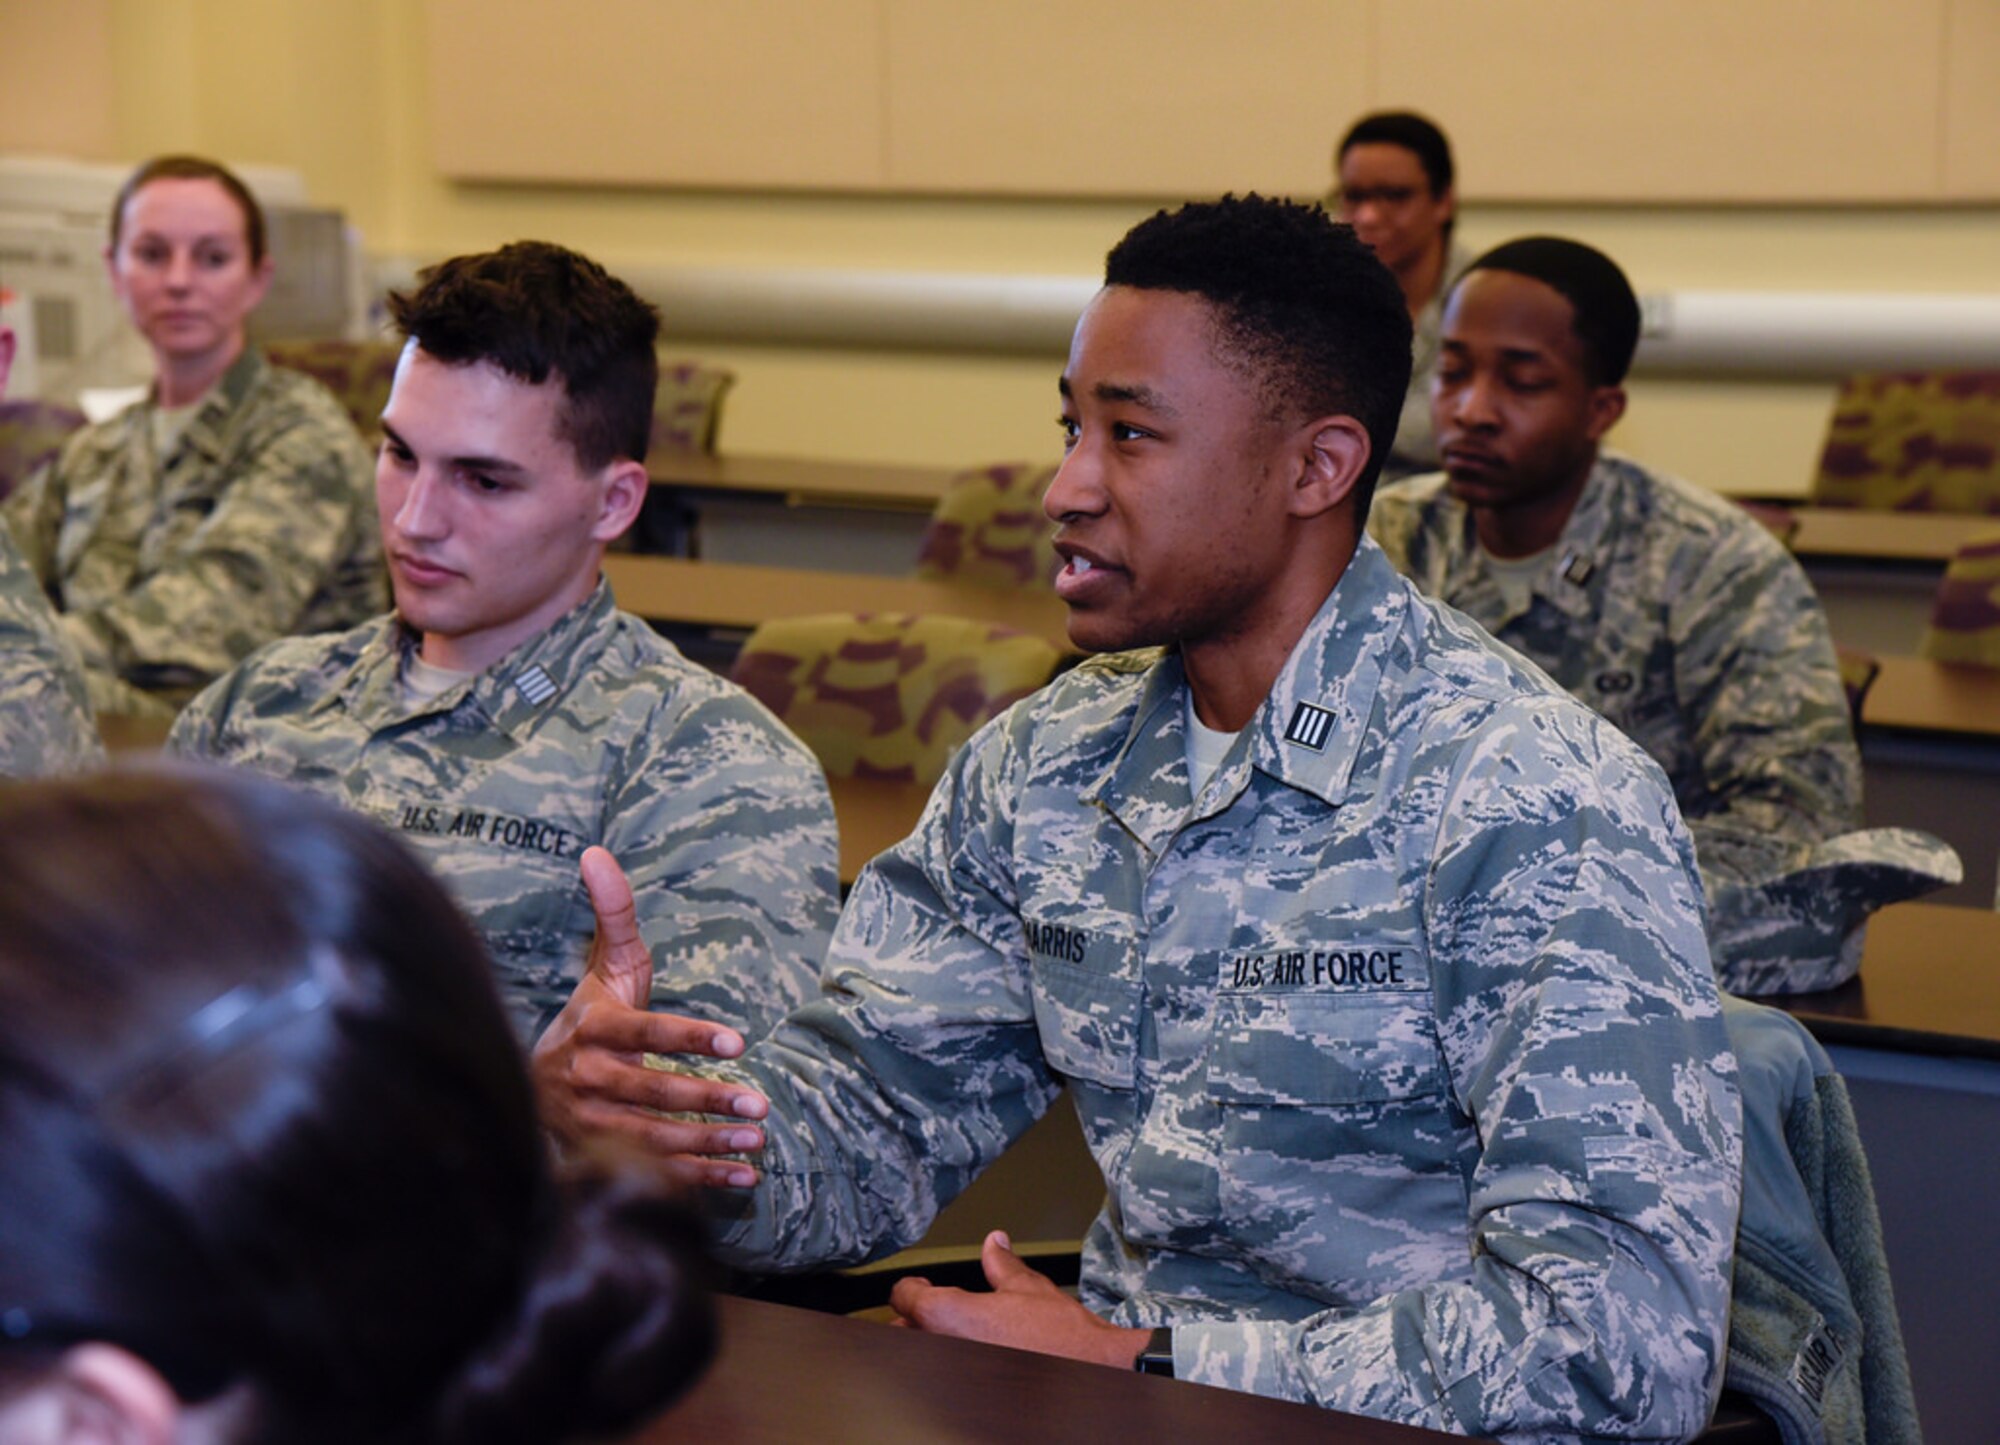 Students engage with Joint Base Andrews, Md., and Joint Base Anacostia-Bolling, D.C., leadership during their tour of the National Capital Region March 21-23, 2018